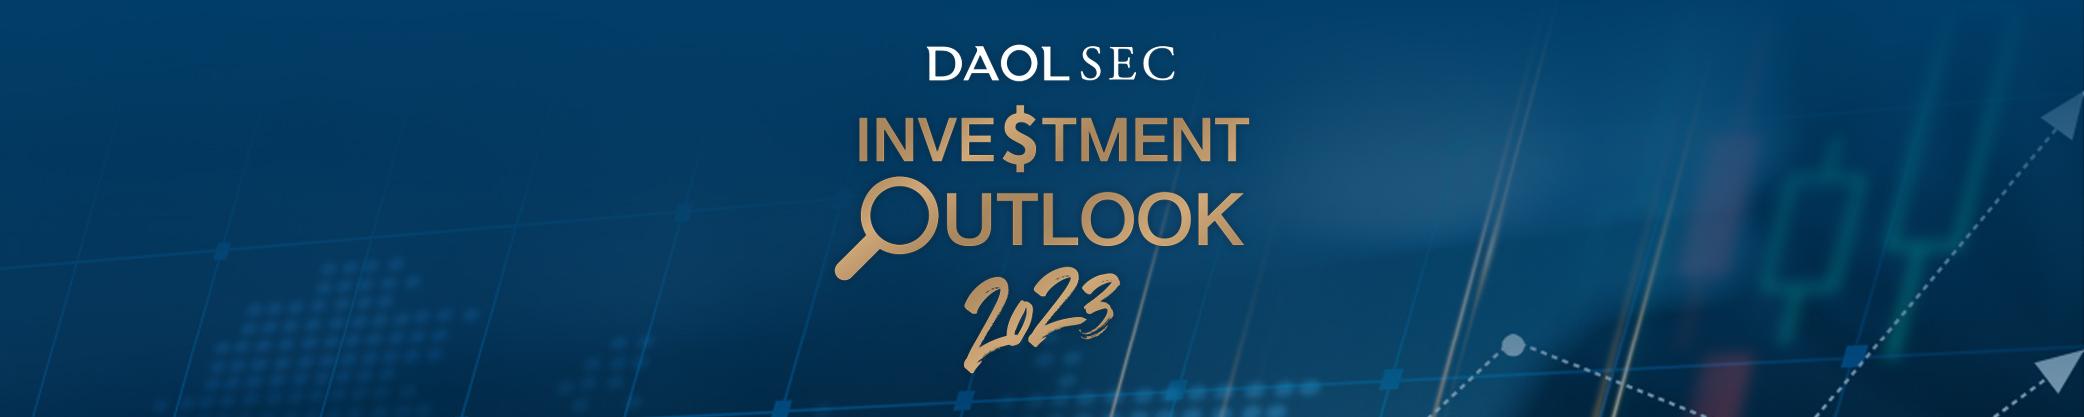 DAOL SEC INVESTMENT OUTLOOK 2023